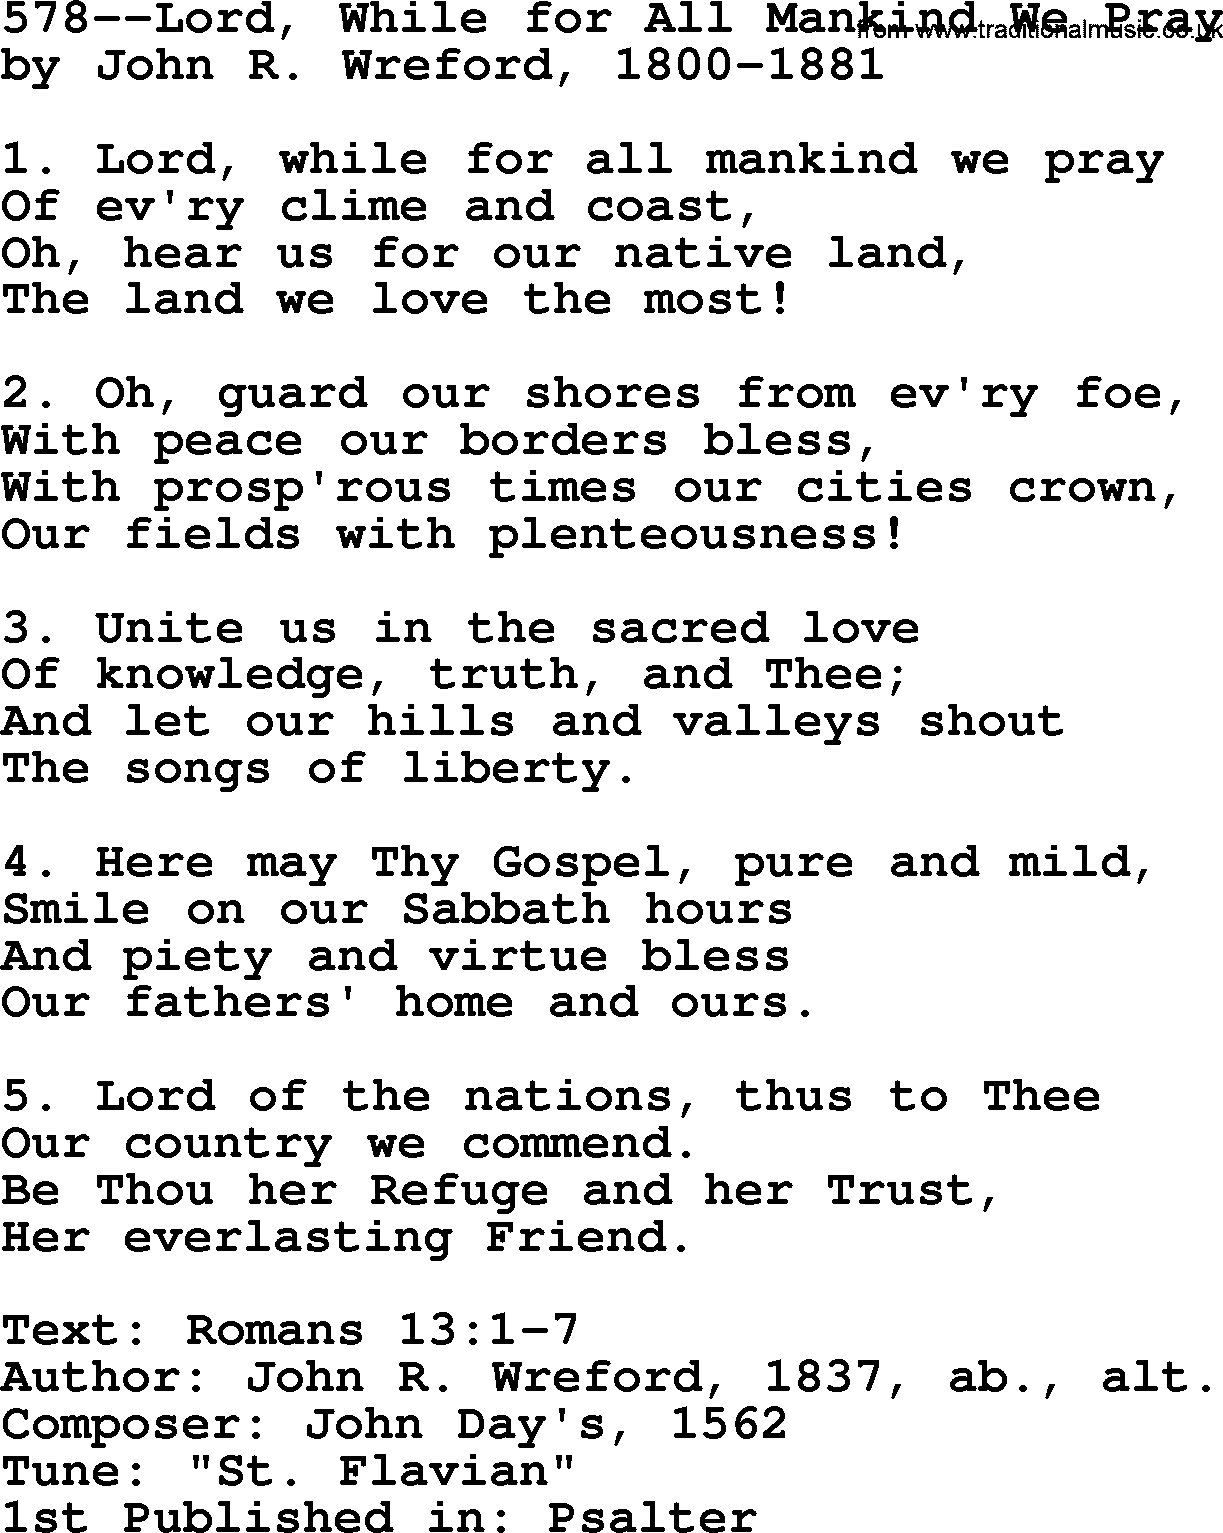 Lutheran Hymn: 578--Lord, While for All Mankind We Pray.txt lyrics with PDF